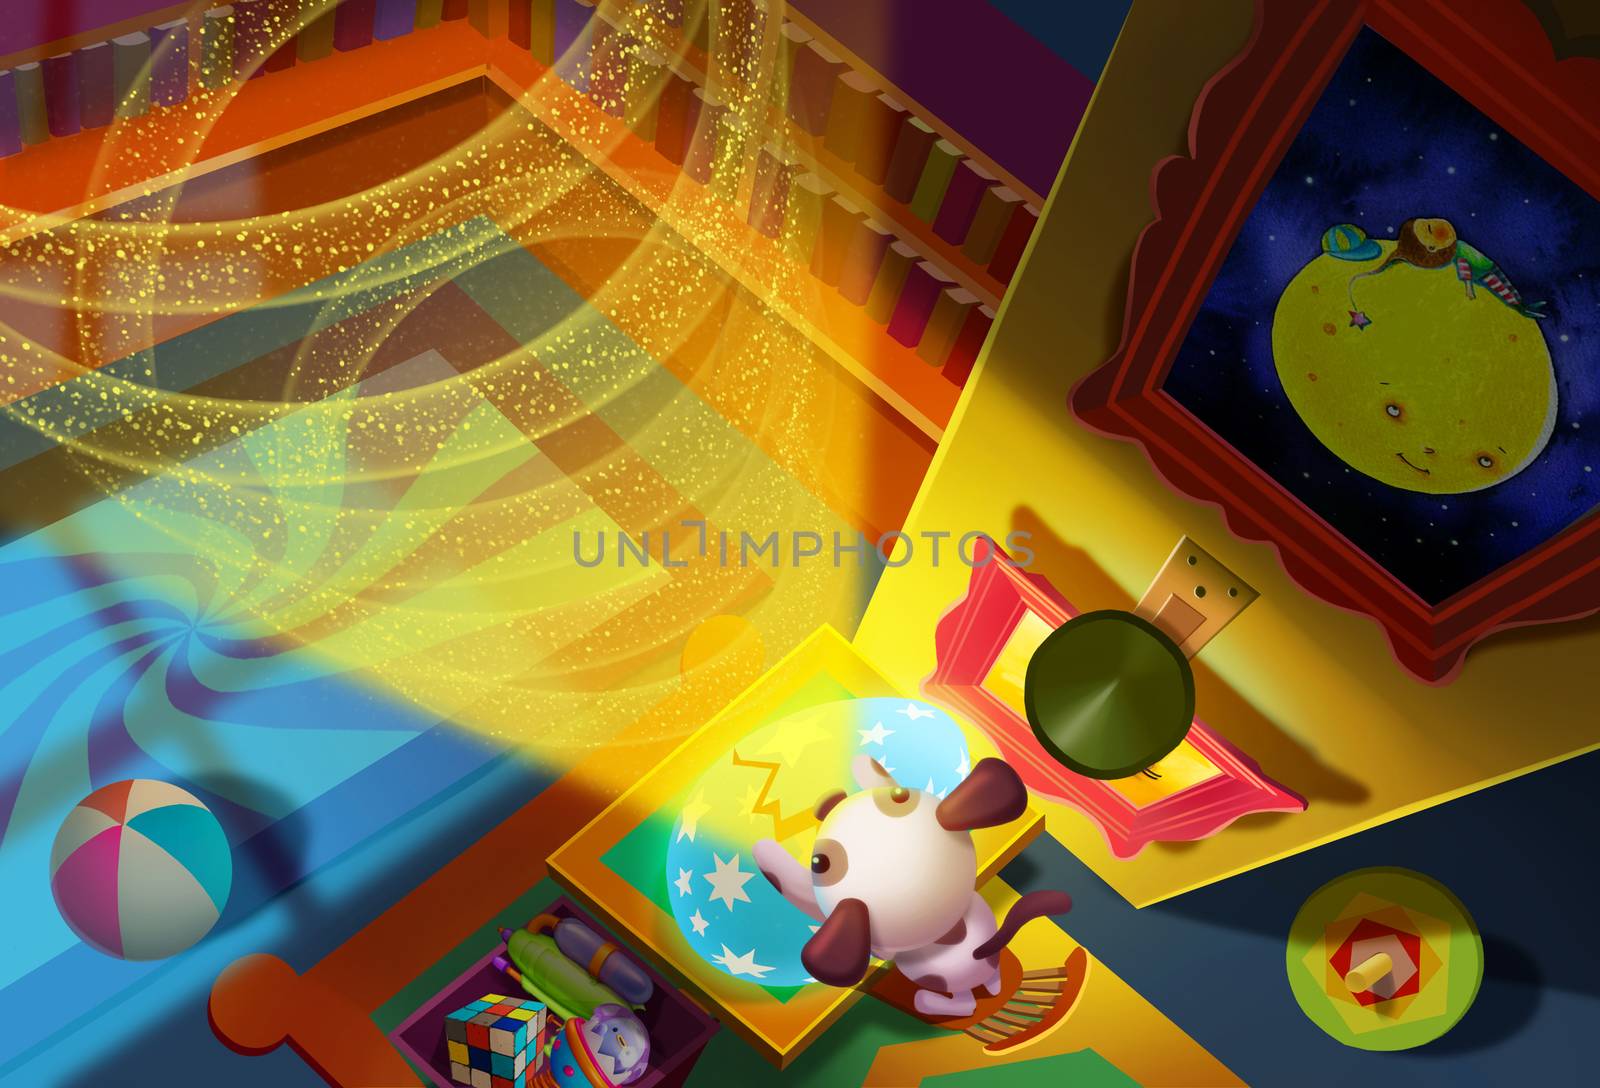 Illustration: Small dog opens the egg, magic rings grow to sky like Jack's beanstalk. He eager to see what's upper there with little master. Fantastic Cartoon Style. Wallpaper Background Scene Design. by NextMars